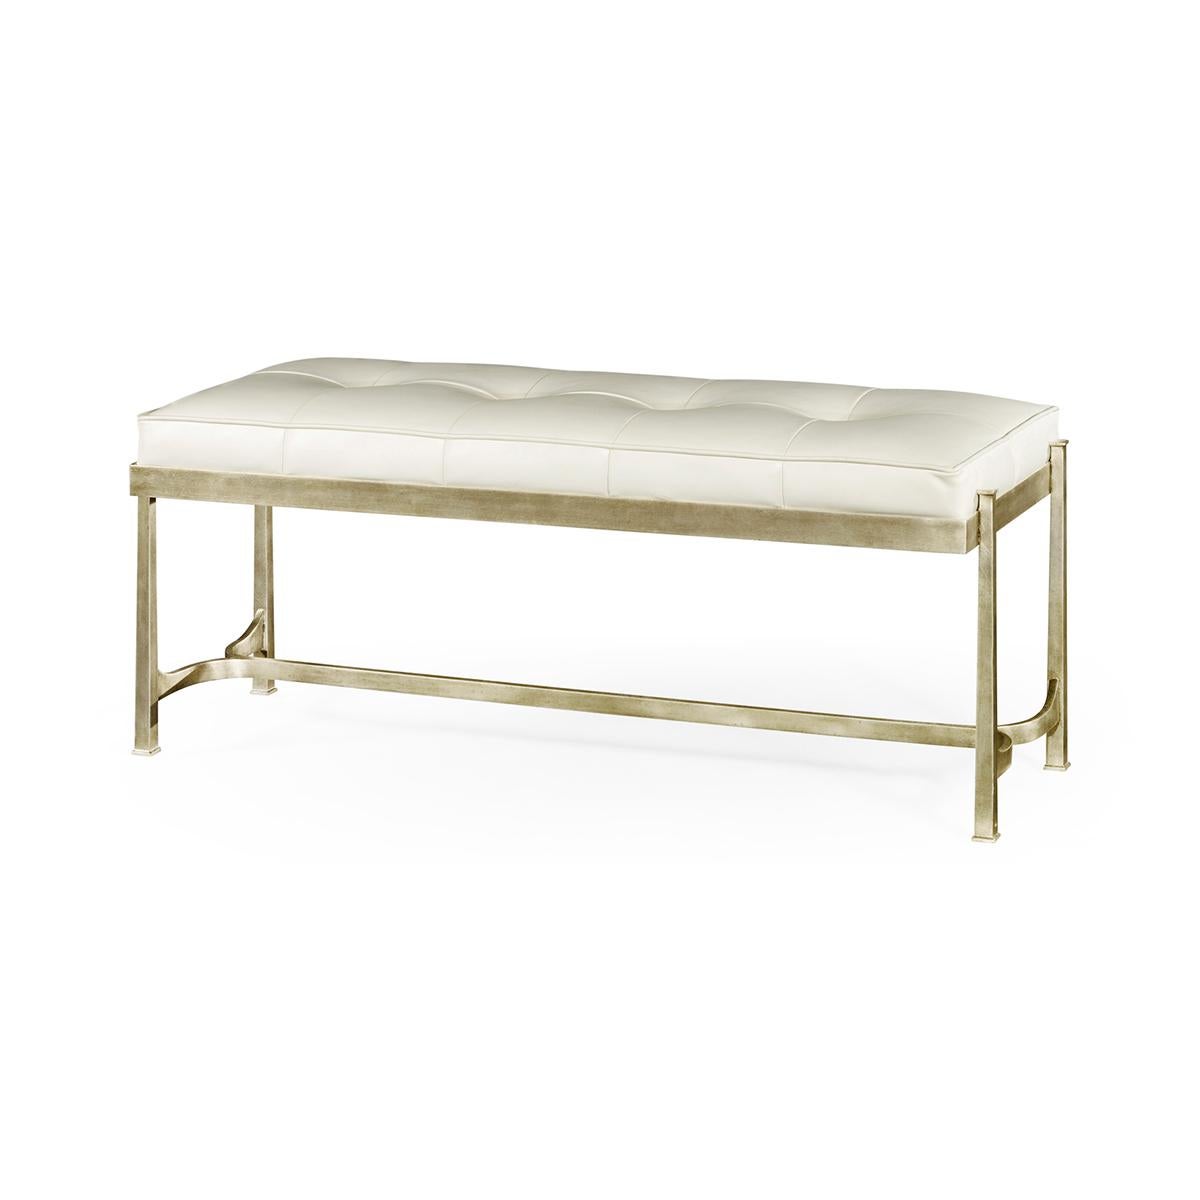 Art Deco Silvered Bench, an Art Deco inspired wrought iron rectangular bench with an antique silver finish and tufted cream leather boxed upholstery cushion.

Dimensions: 48